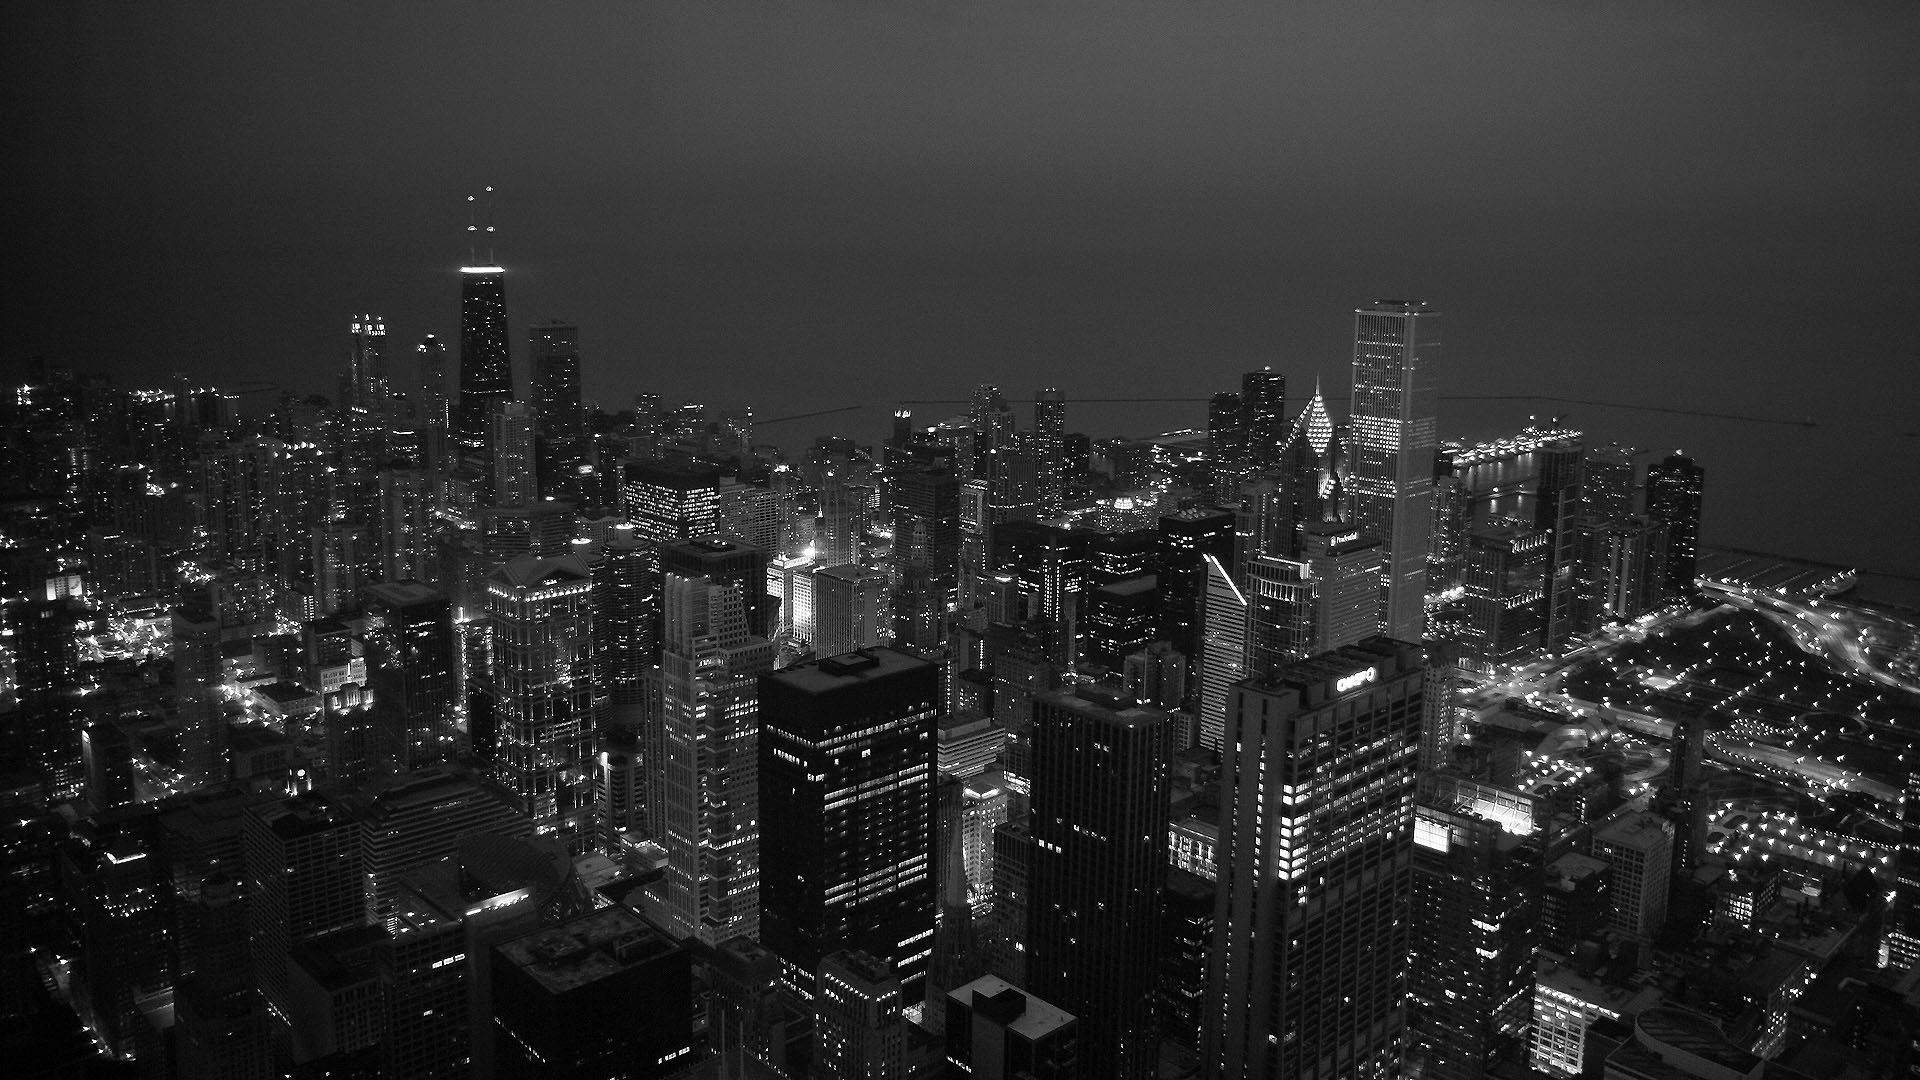 Download Black And White Aesthetic City At Night Wallpaper 